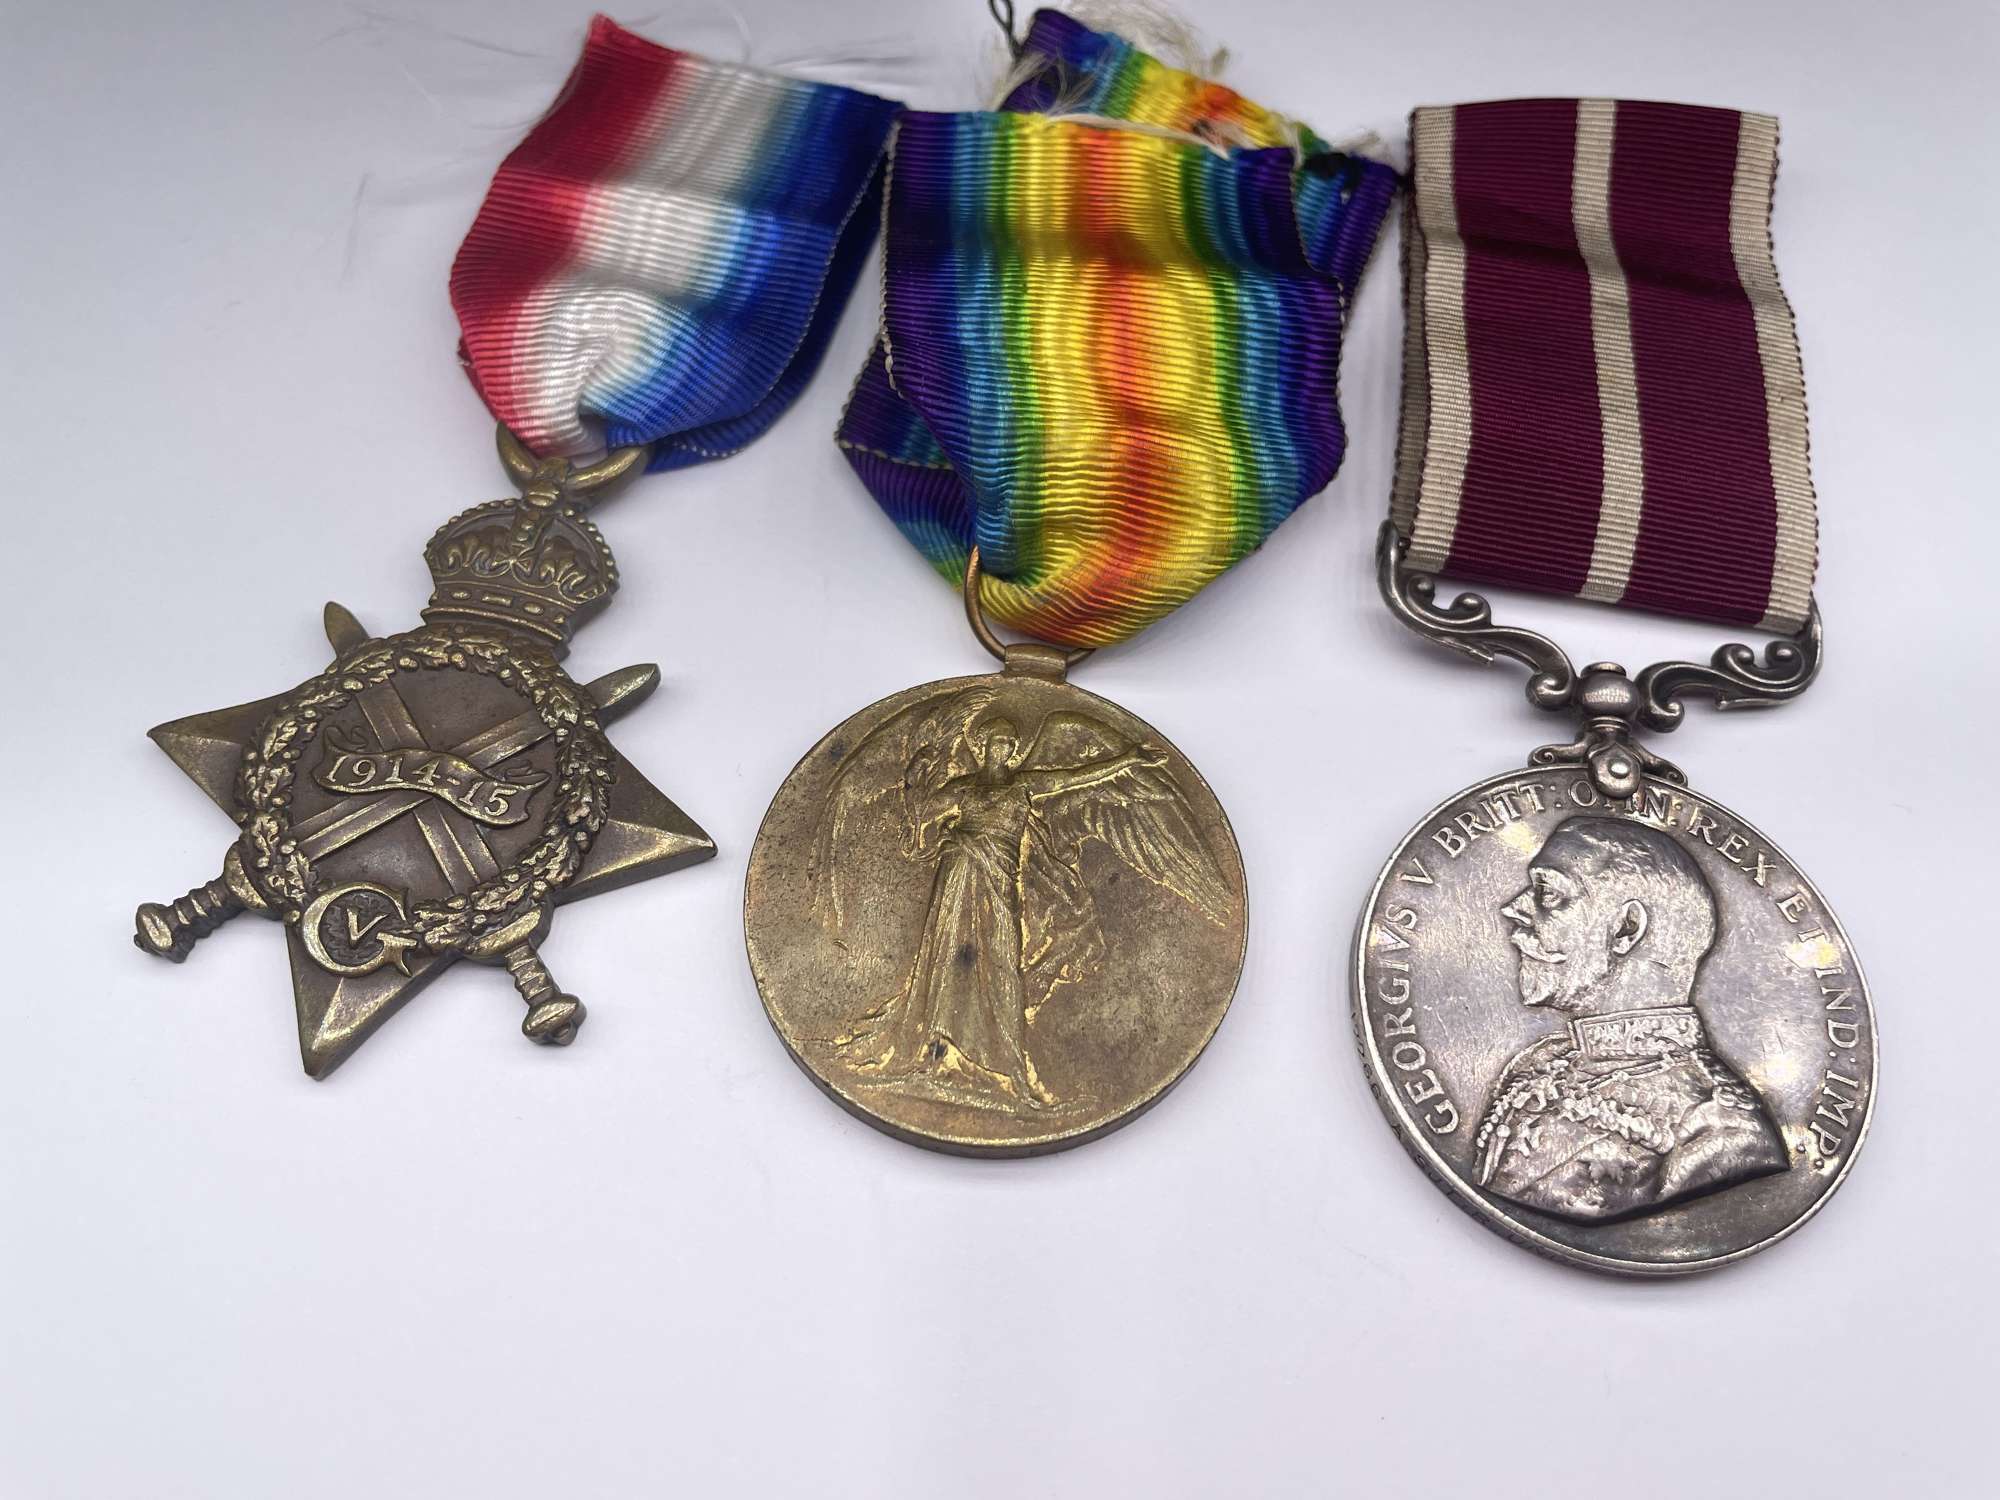 Original World War One Medal Group, with Meritorious Service Medal, Pte. Underwood